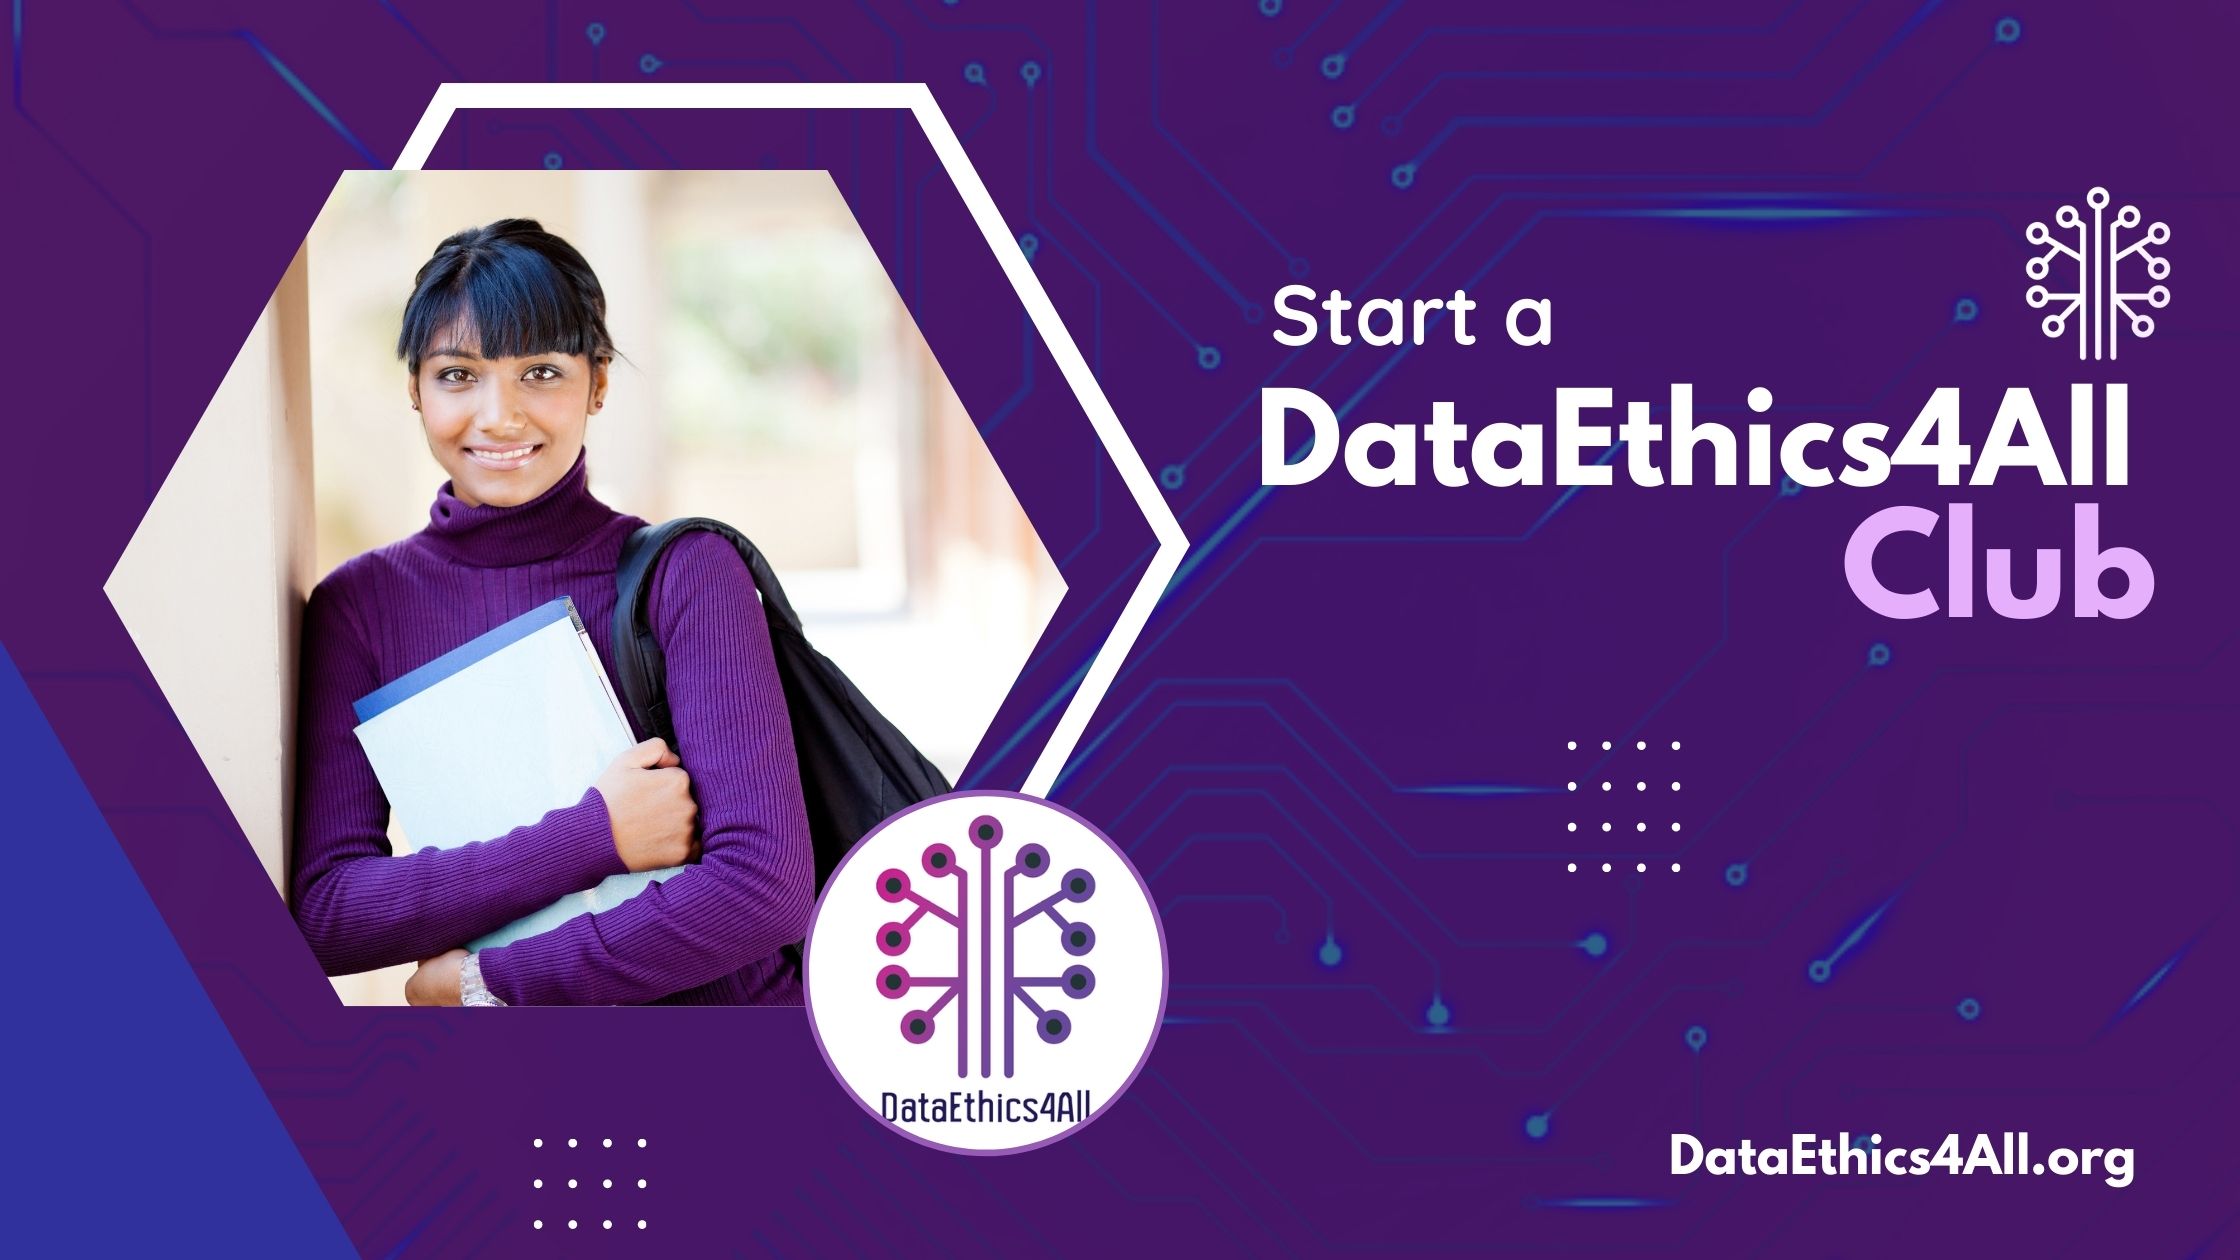 Start a DataEthics4All Club at your local Middle or High School